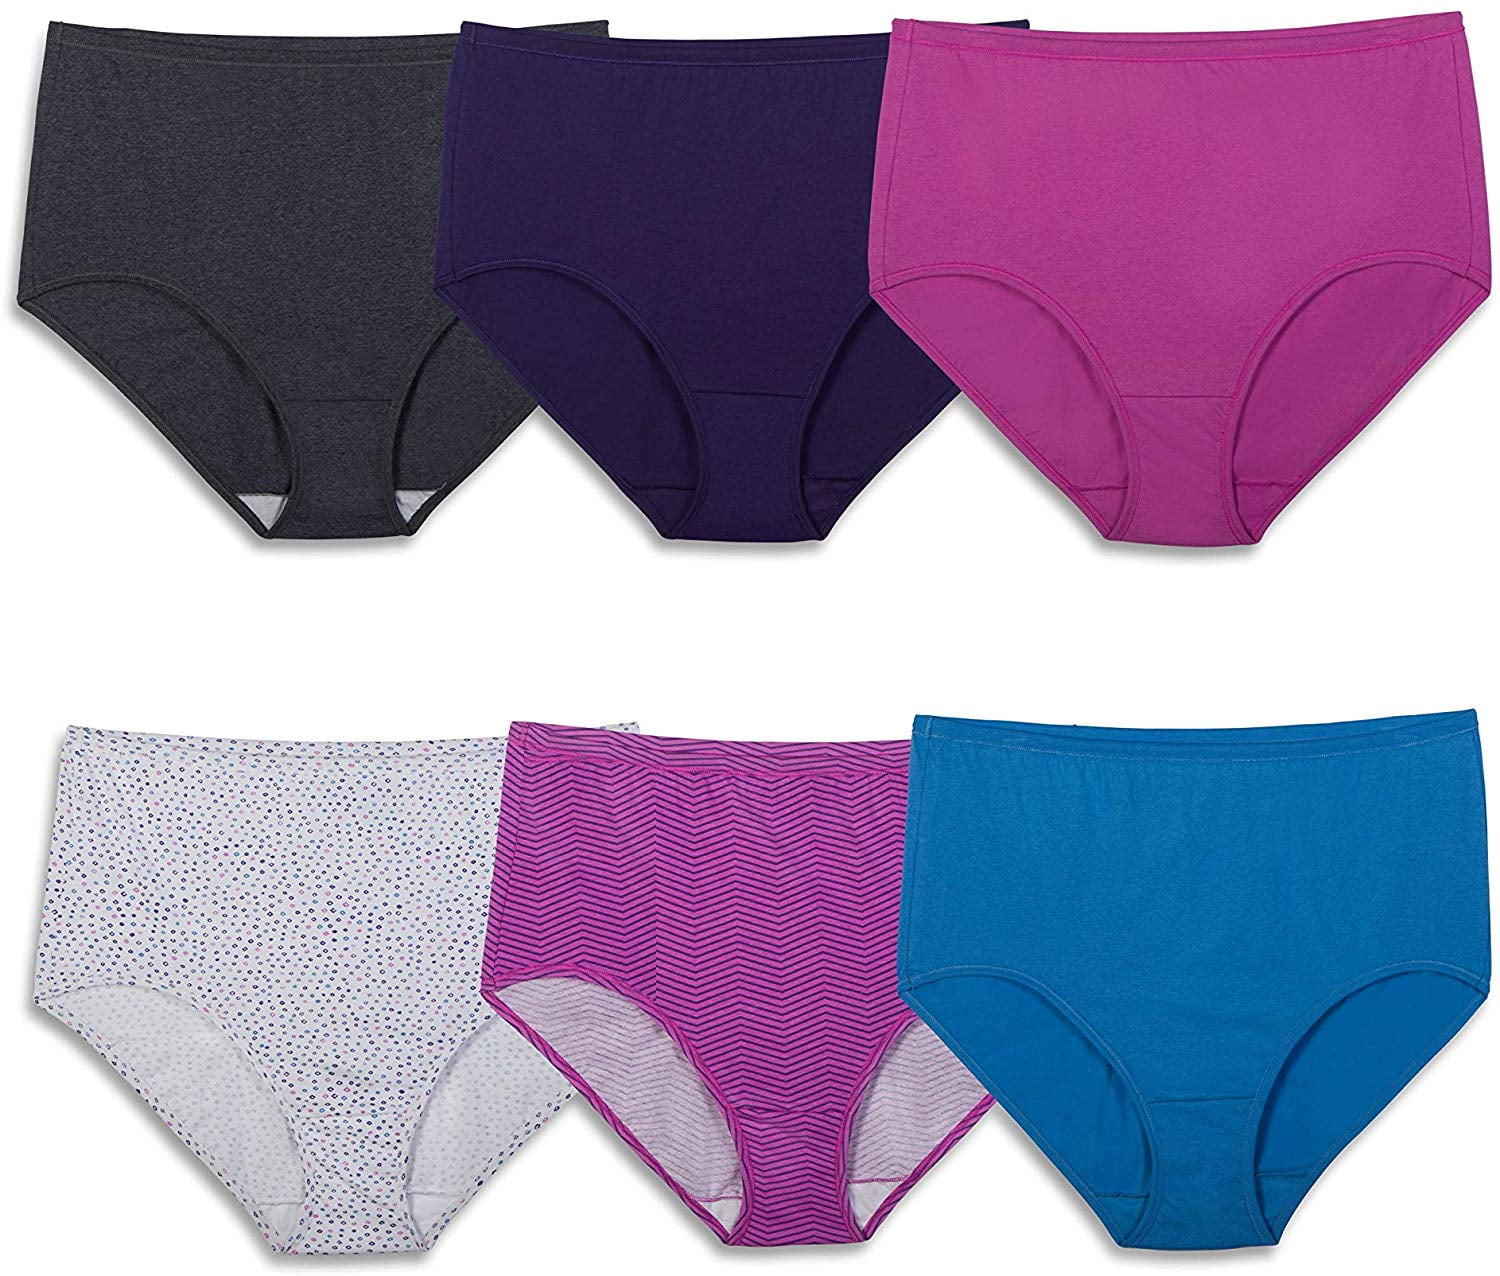 Fruit of the Loom Women s Underwear Cotton Brief Panty Multipack ...